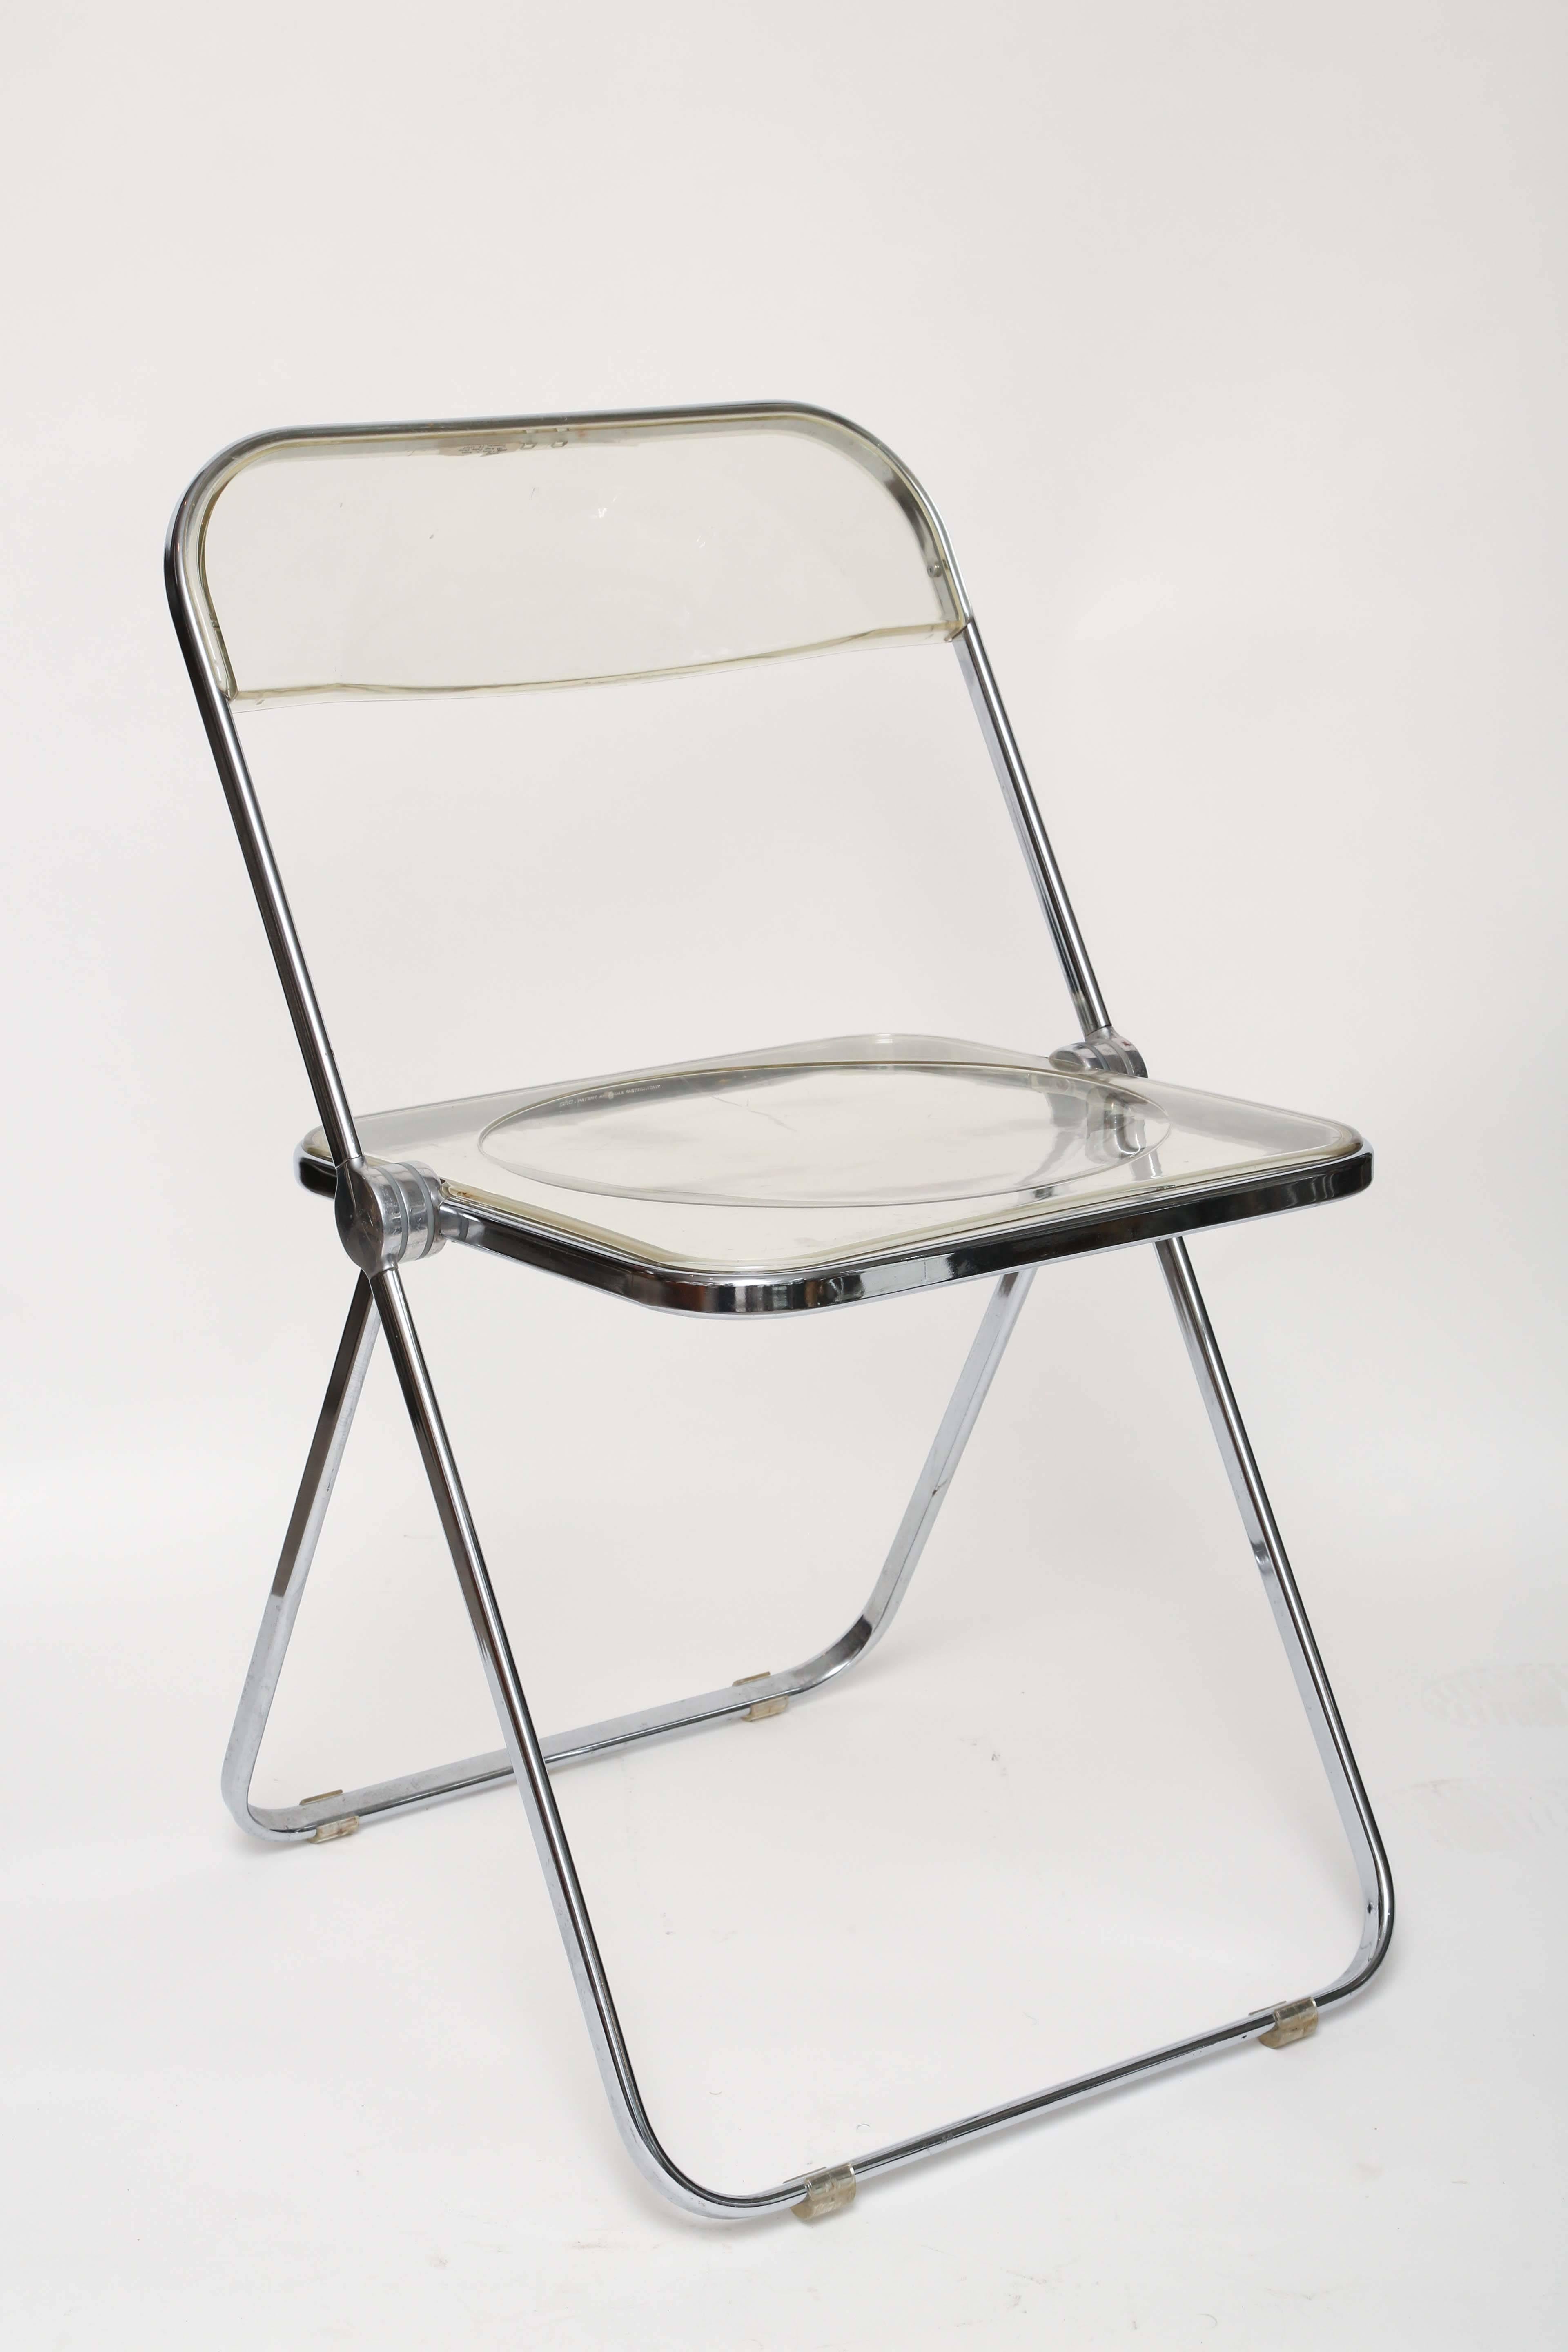 Constructed of metal with chrome fin. And molded acrylic seat and back supports. These chairs are in good all original vintage condition. All chairs have the glides and are signed. These chairs fold to approximate 1